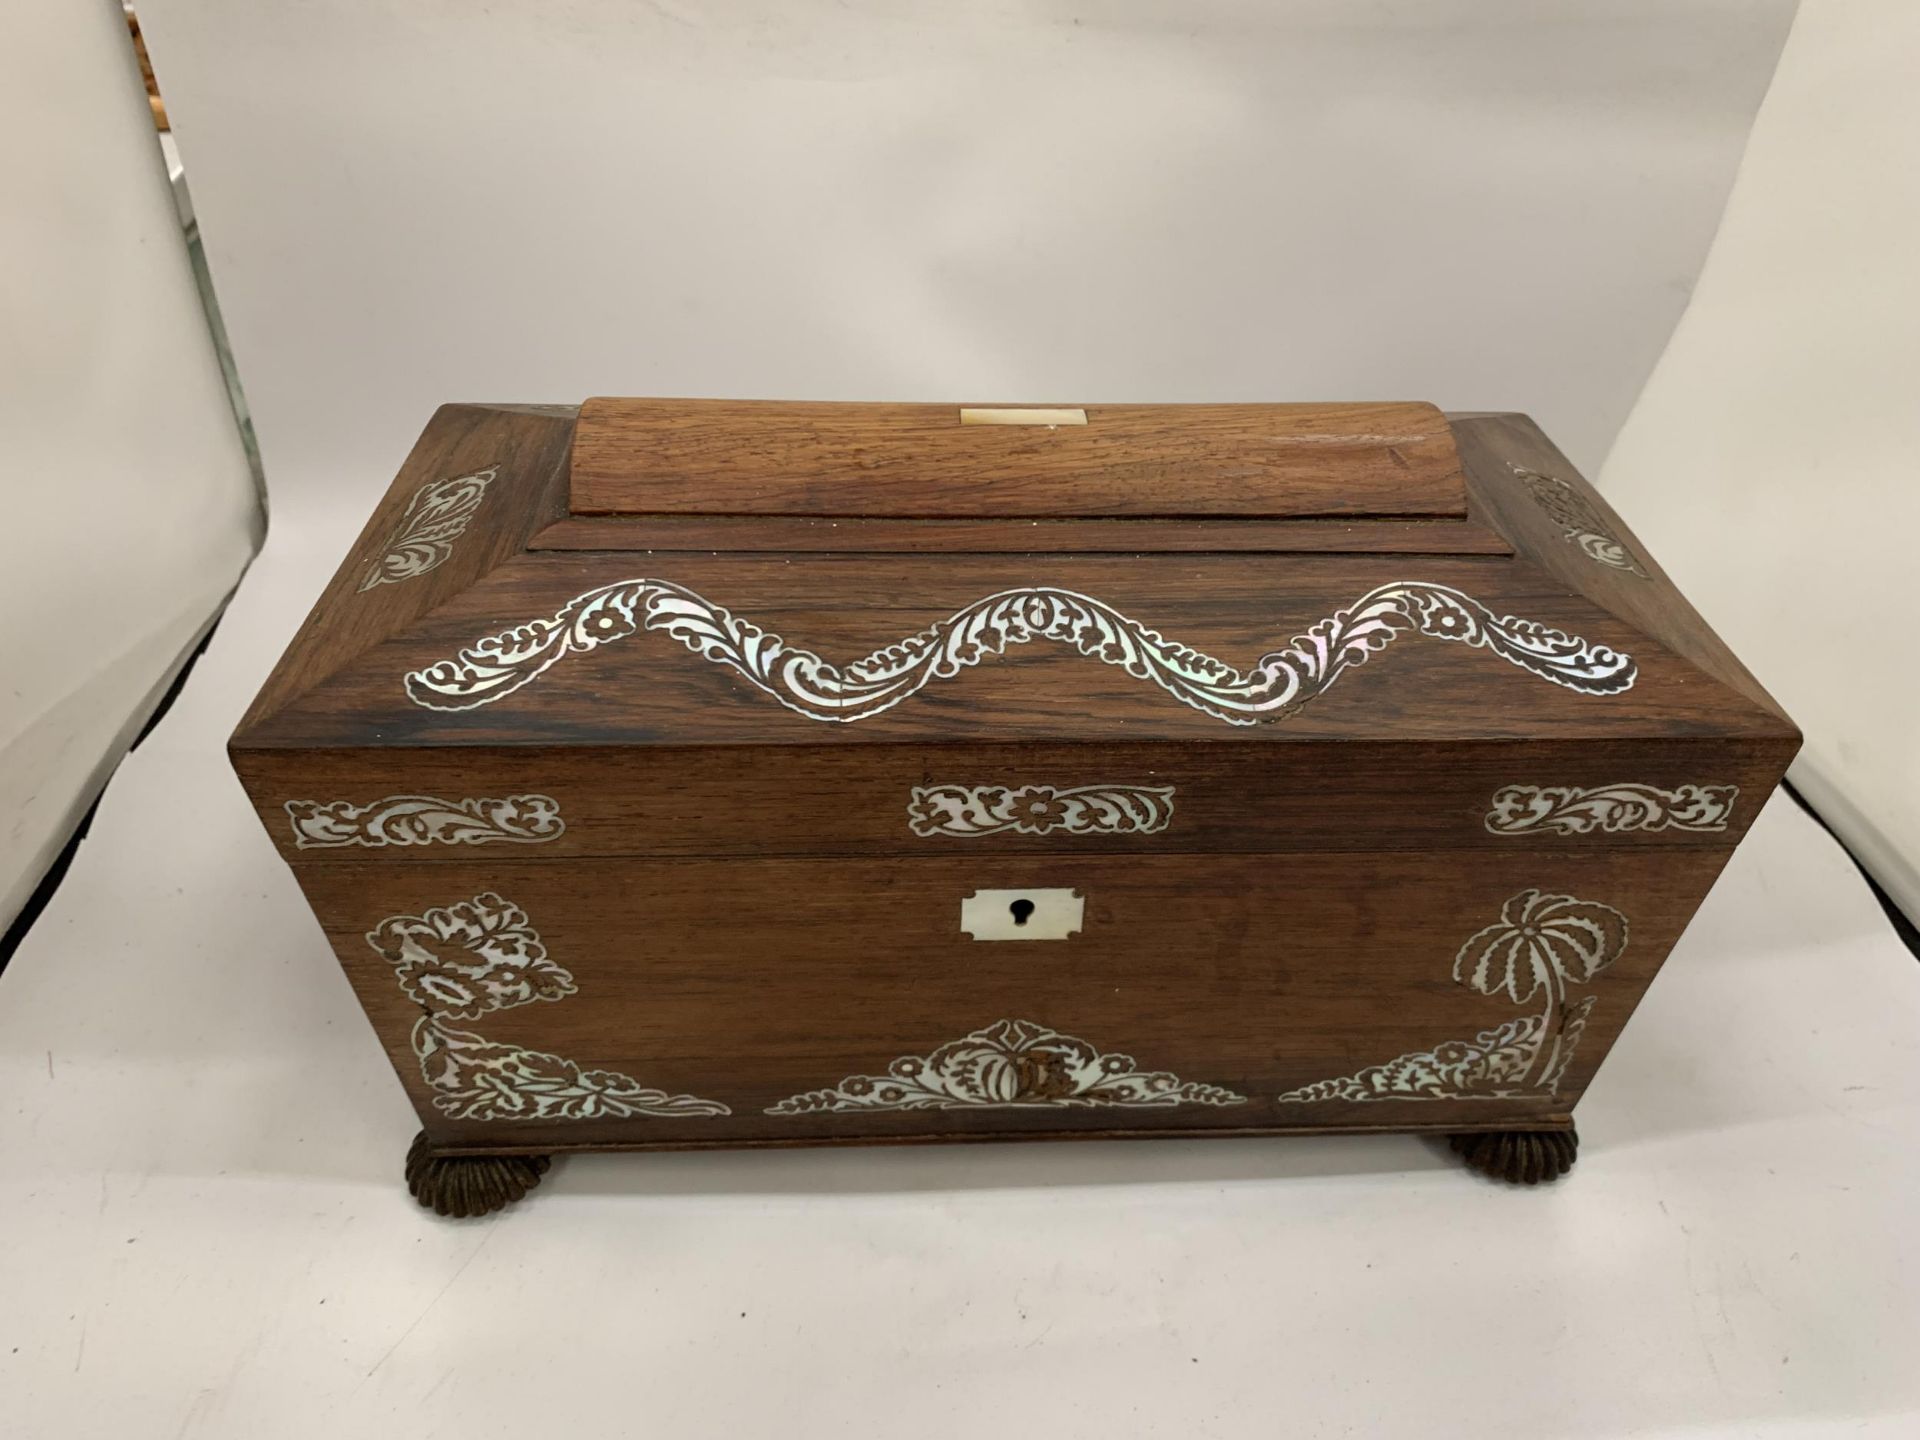 AN ANTIQUE ROSEWOOD AND MOTHER OF PEARL TEA CADDY WITH TWO INNER COMPARTMENTS AND CUT GLASS BOWL